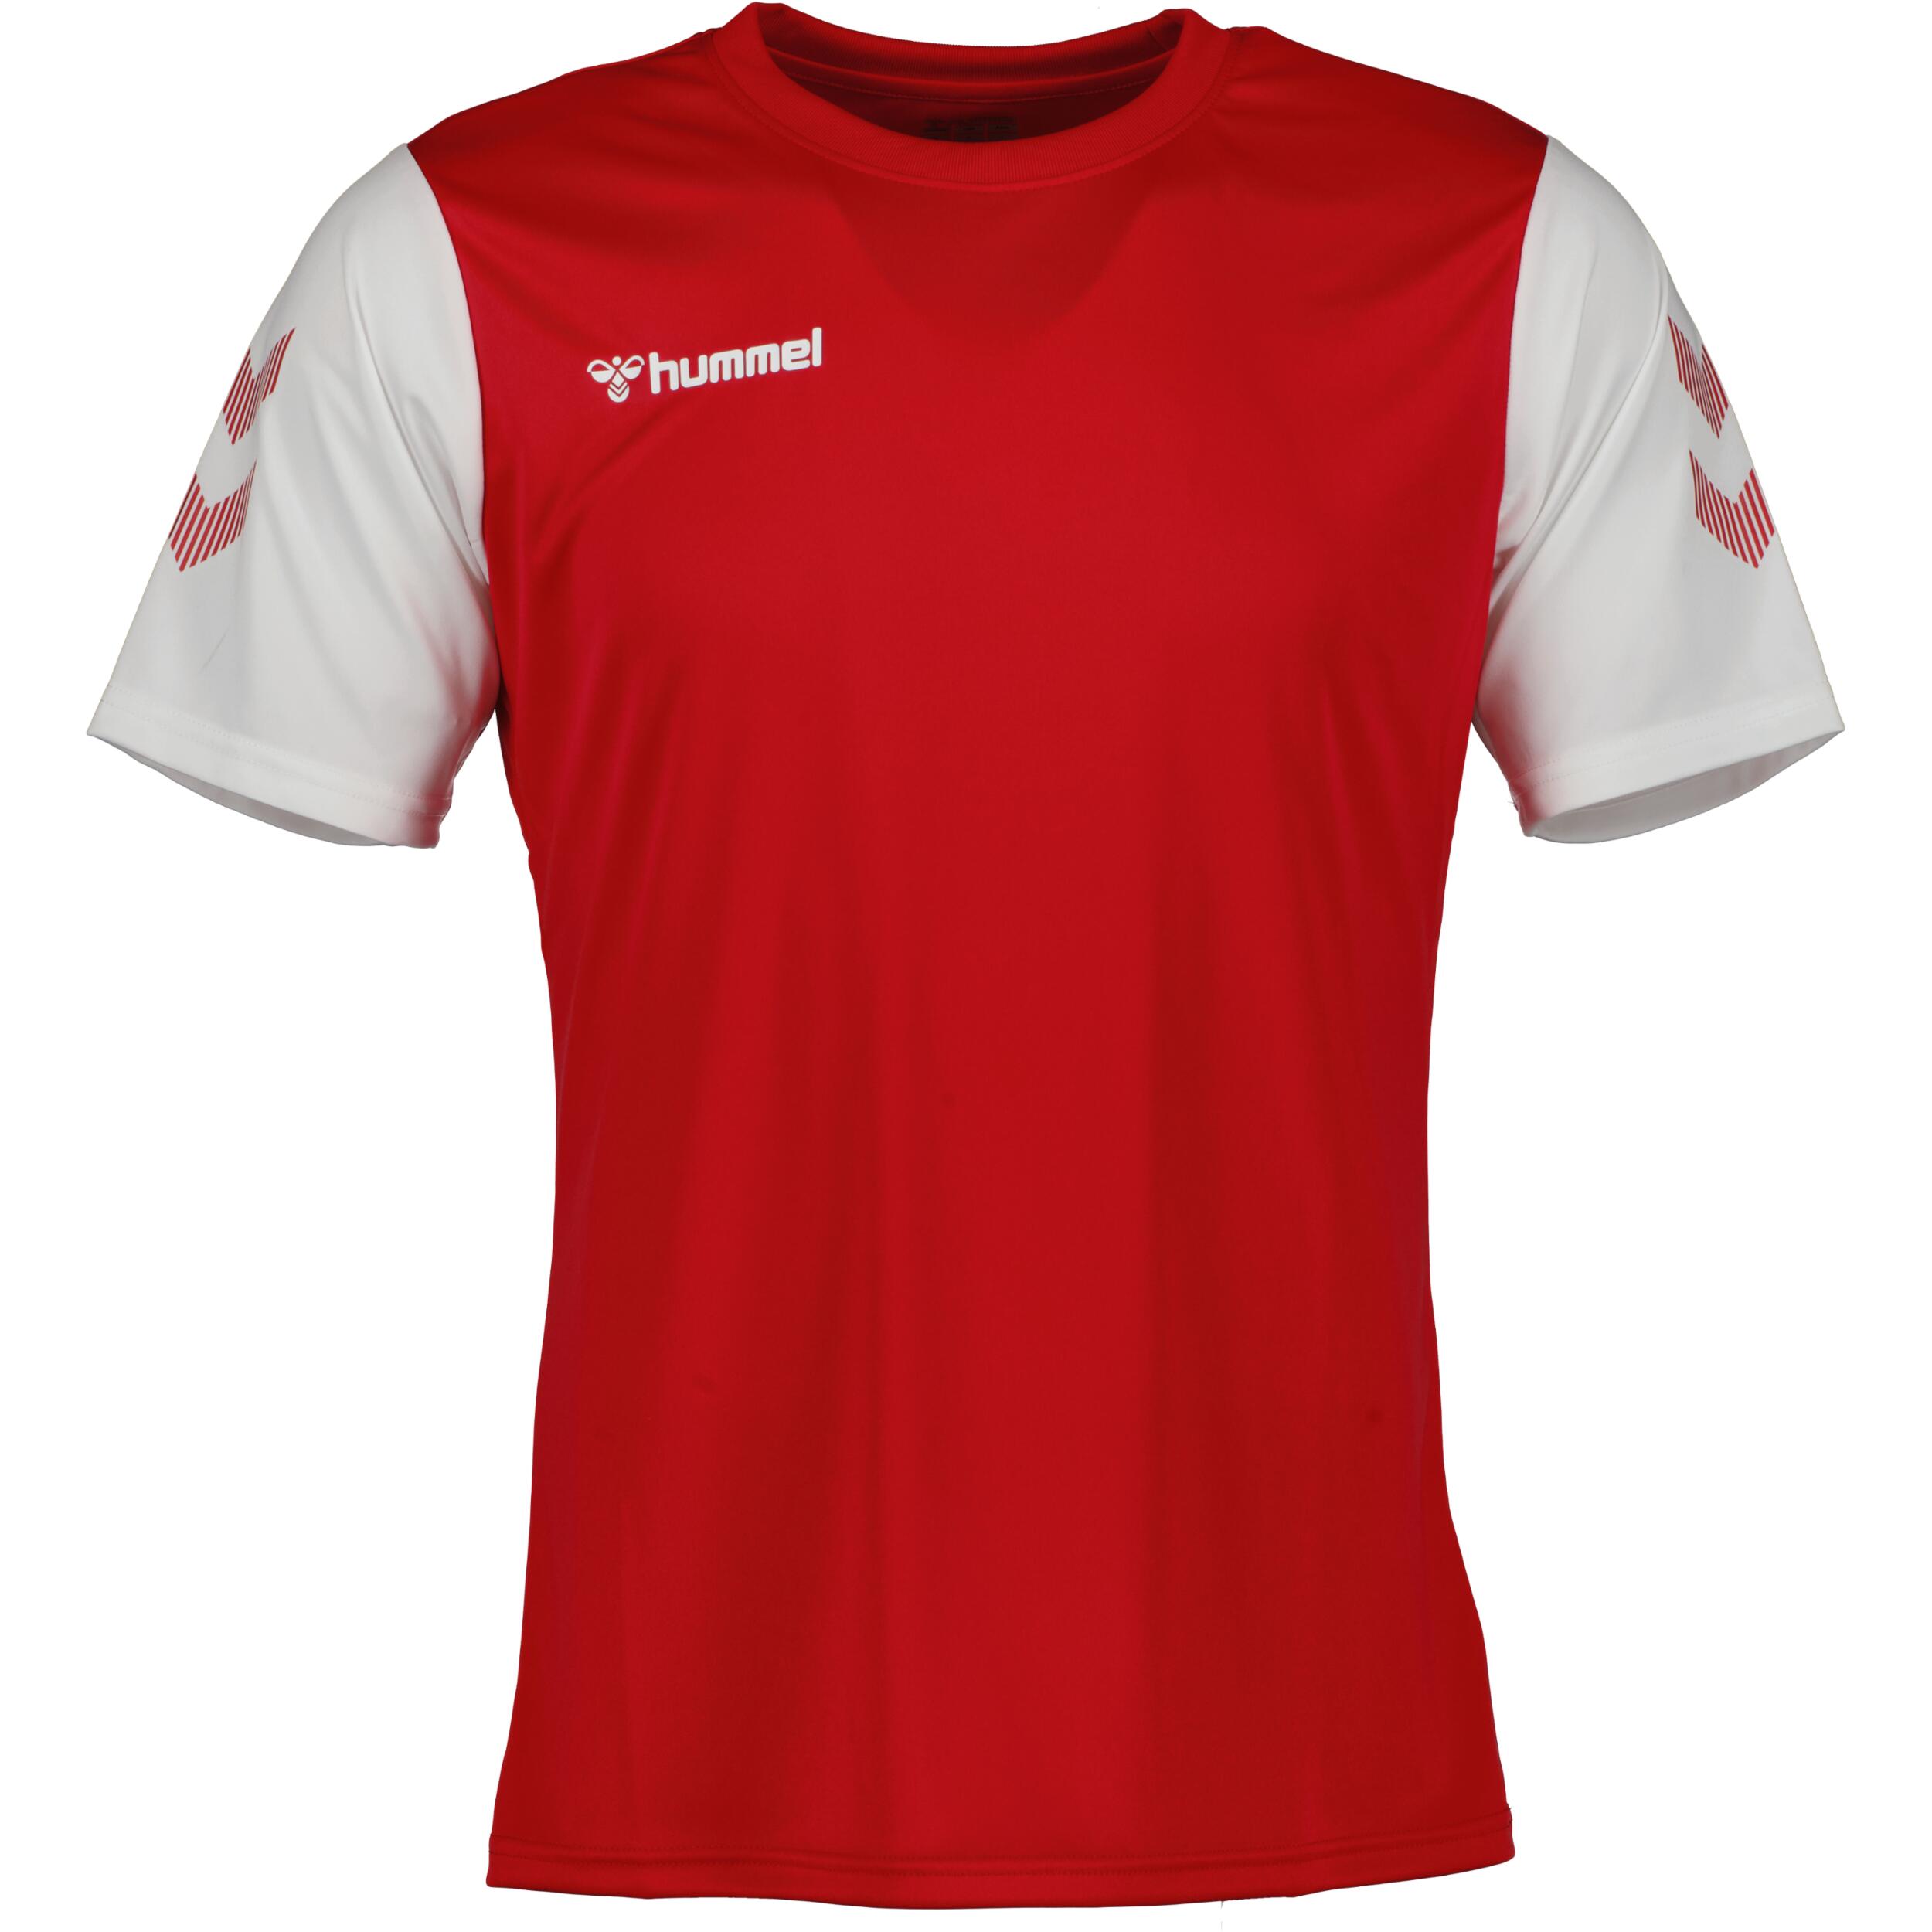 HUMMEL Match jersey for men, great for football, in red/white